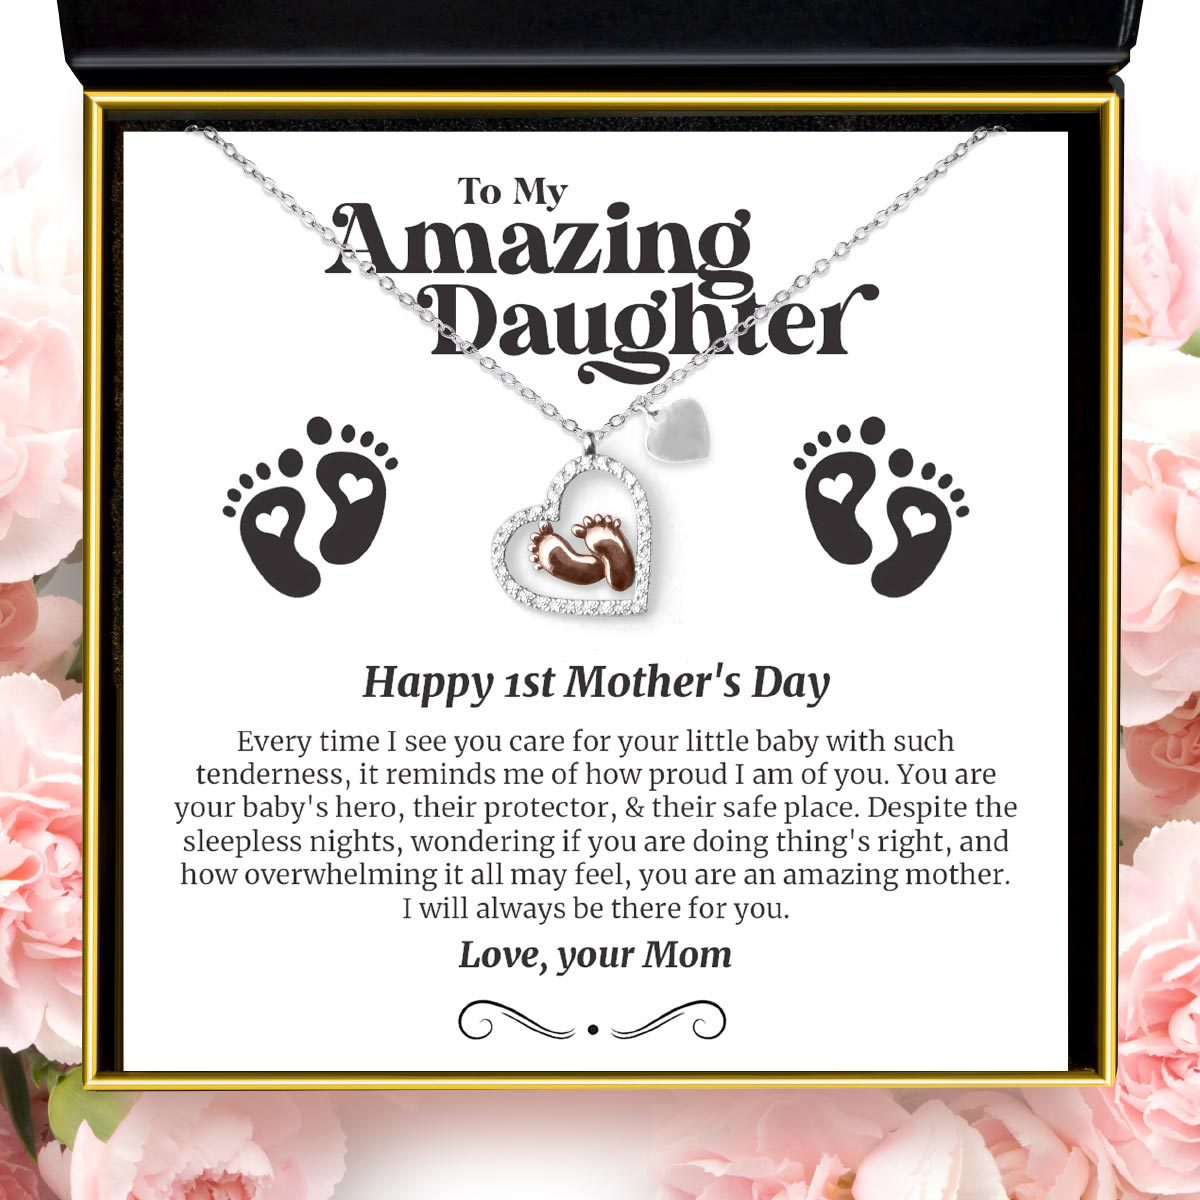 To My Amazing Daughter, Happy 1st Mother's Day - Baby Feet Necklace Gift Set